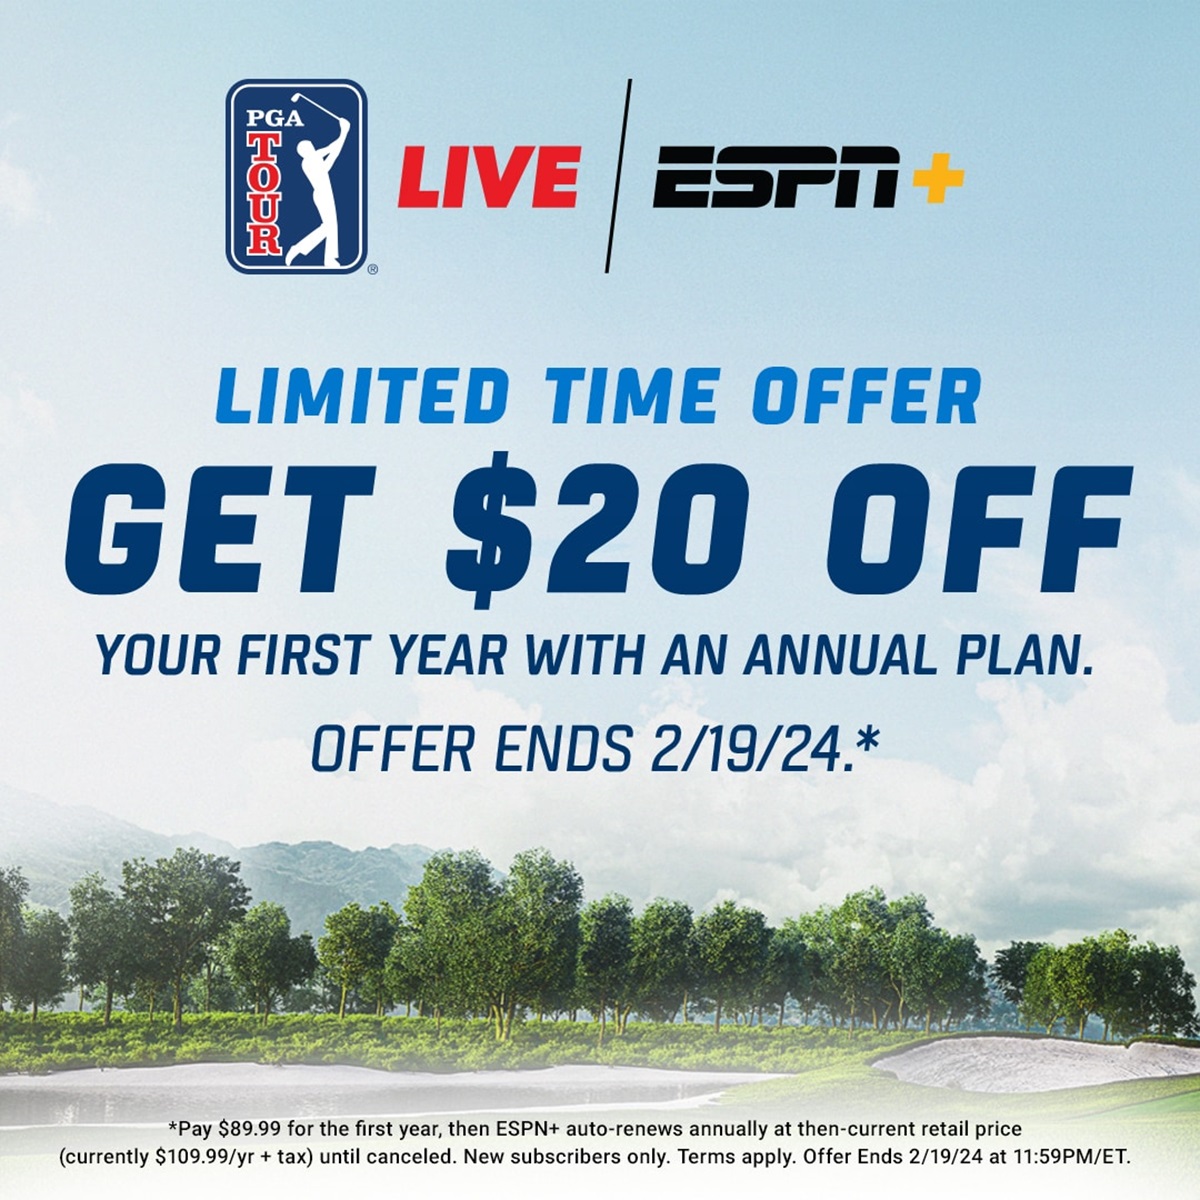 Deal Alert! Get $20 Off Your First Year of ESPN+